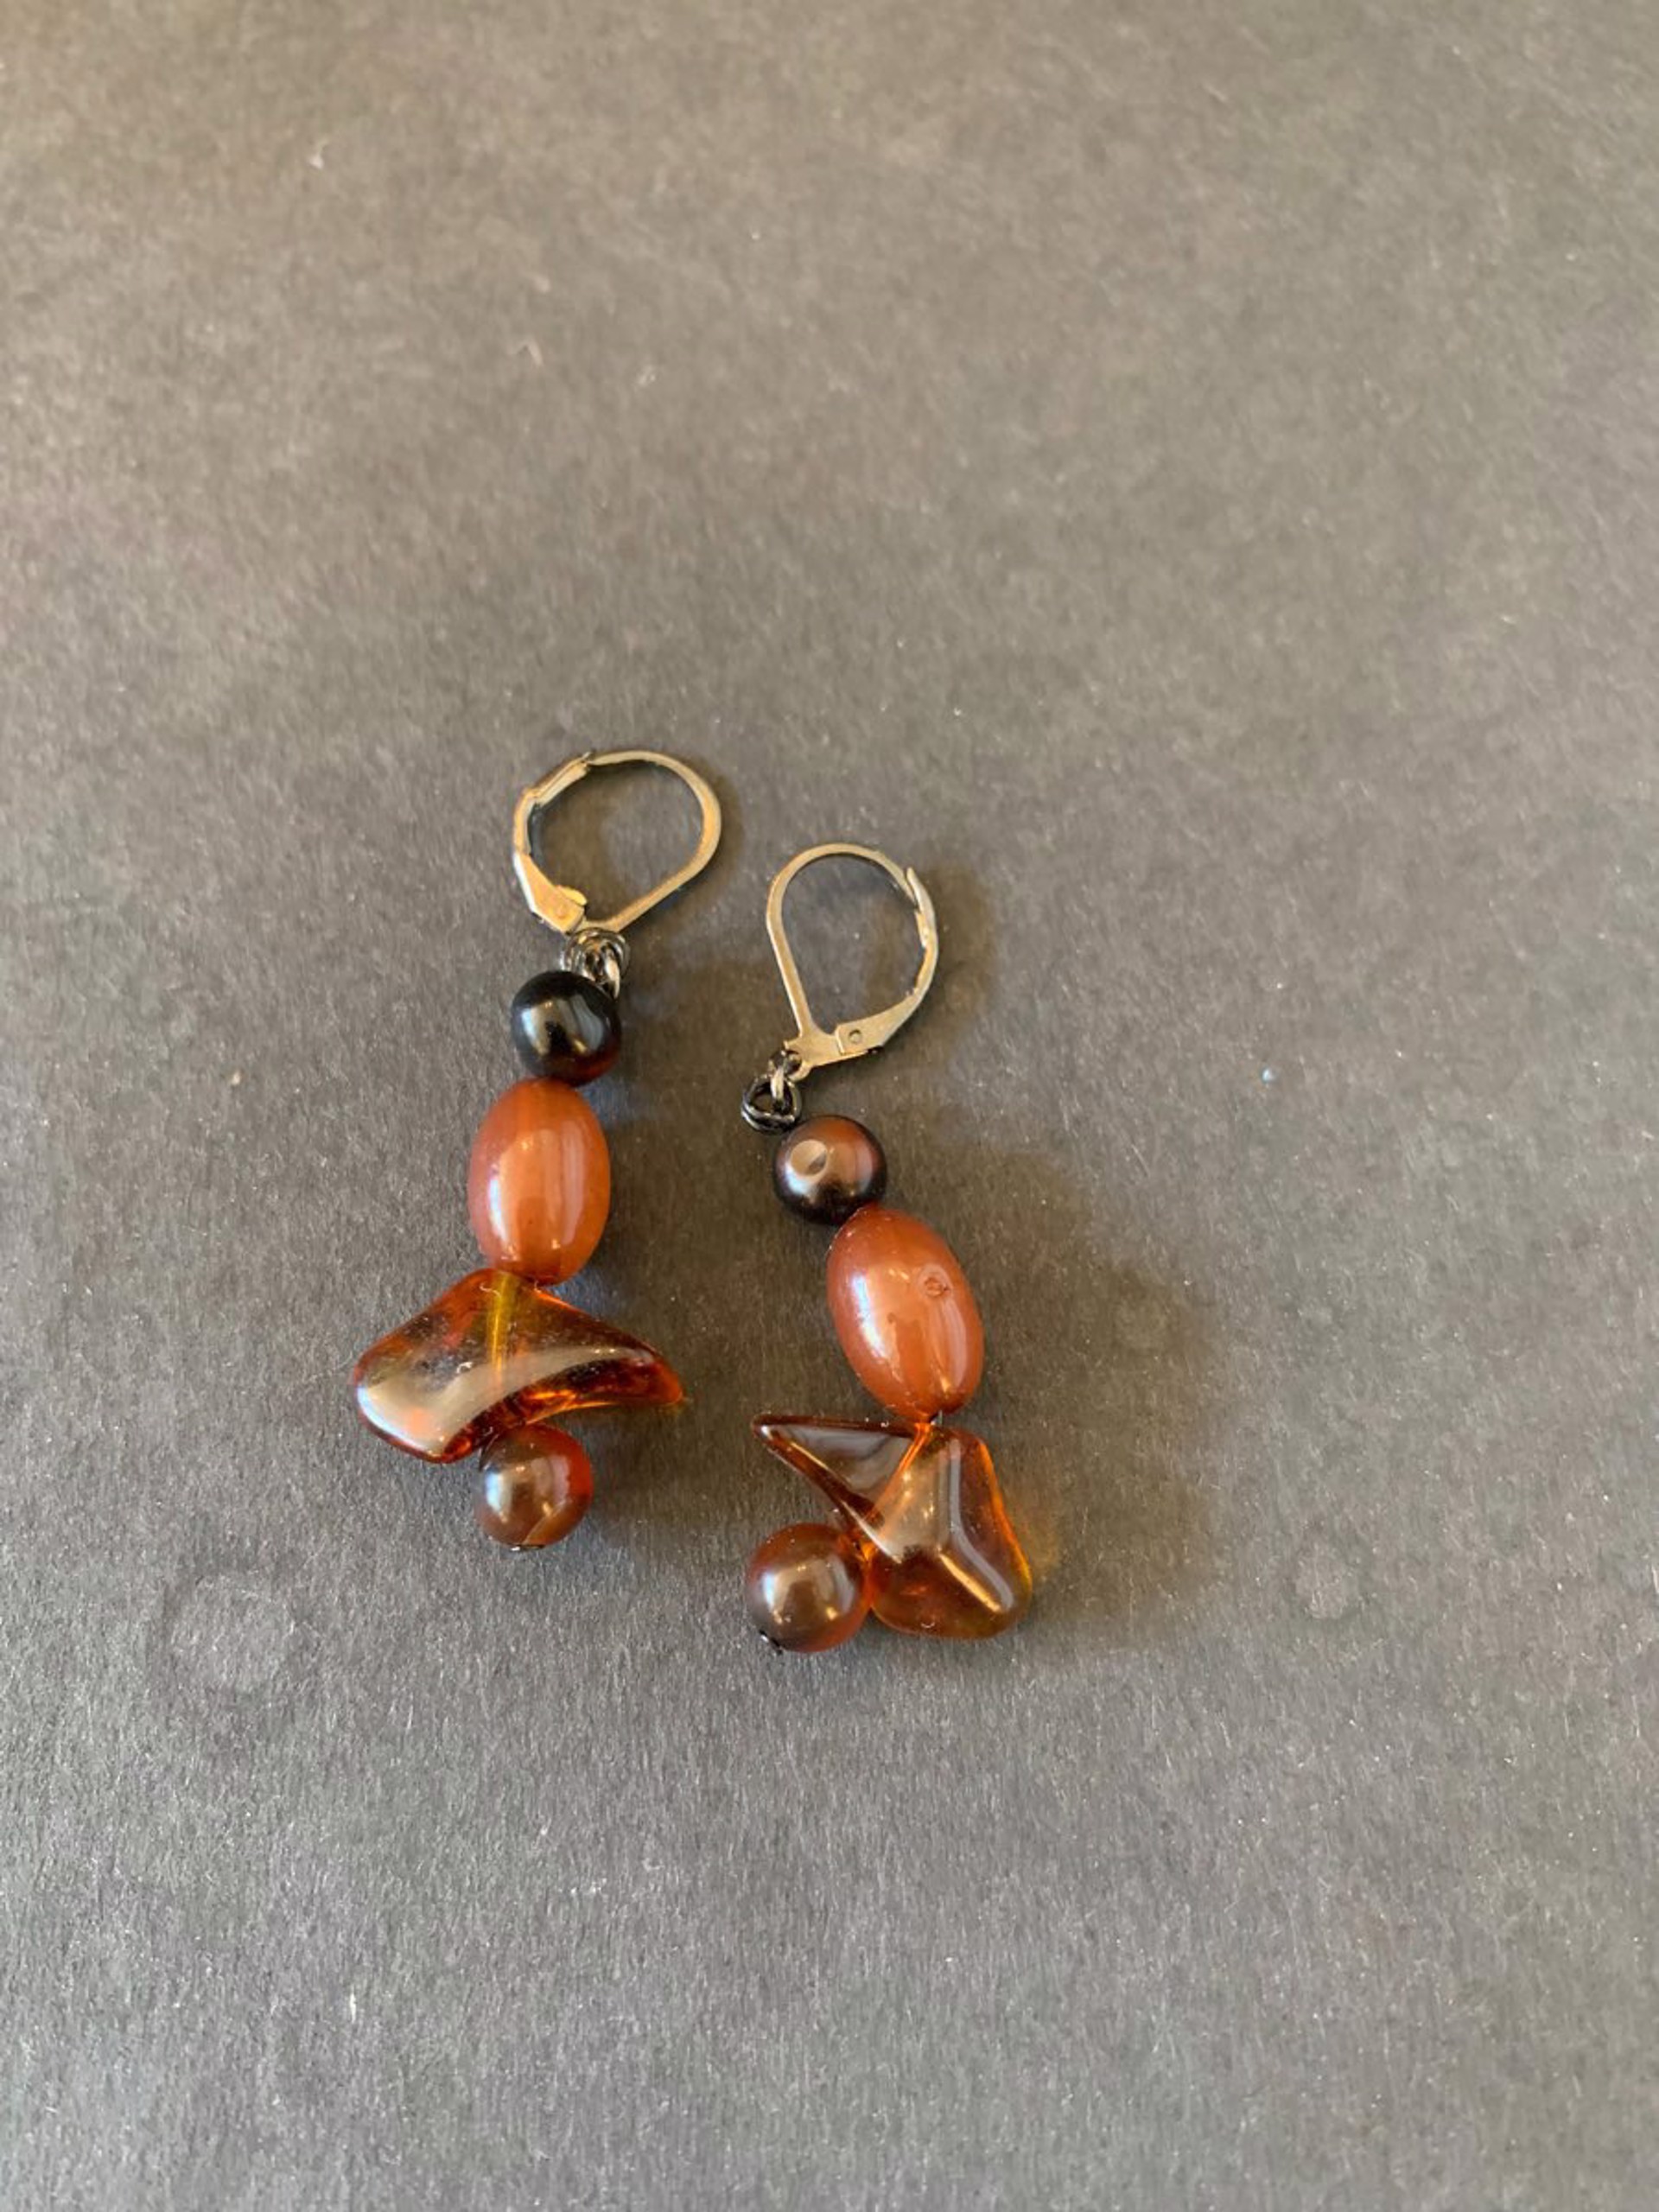 Russet and Amber Earrings by Patty Elzinga